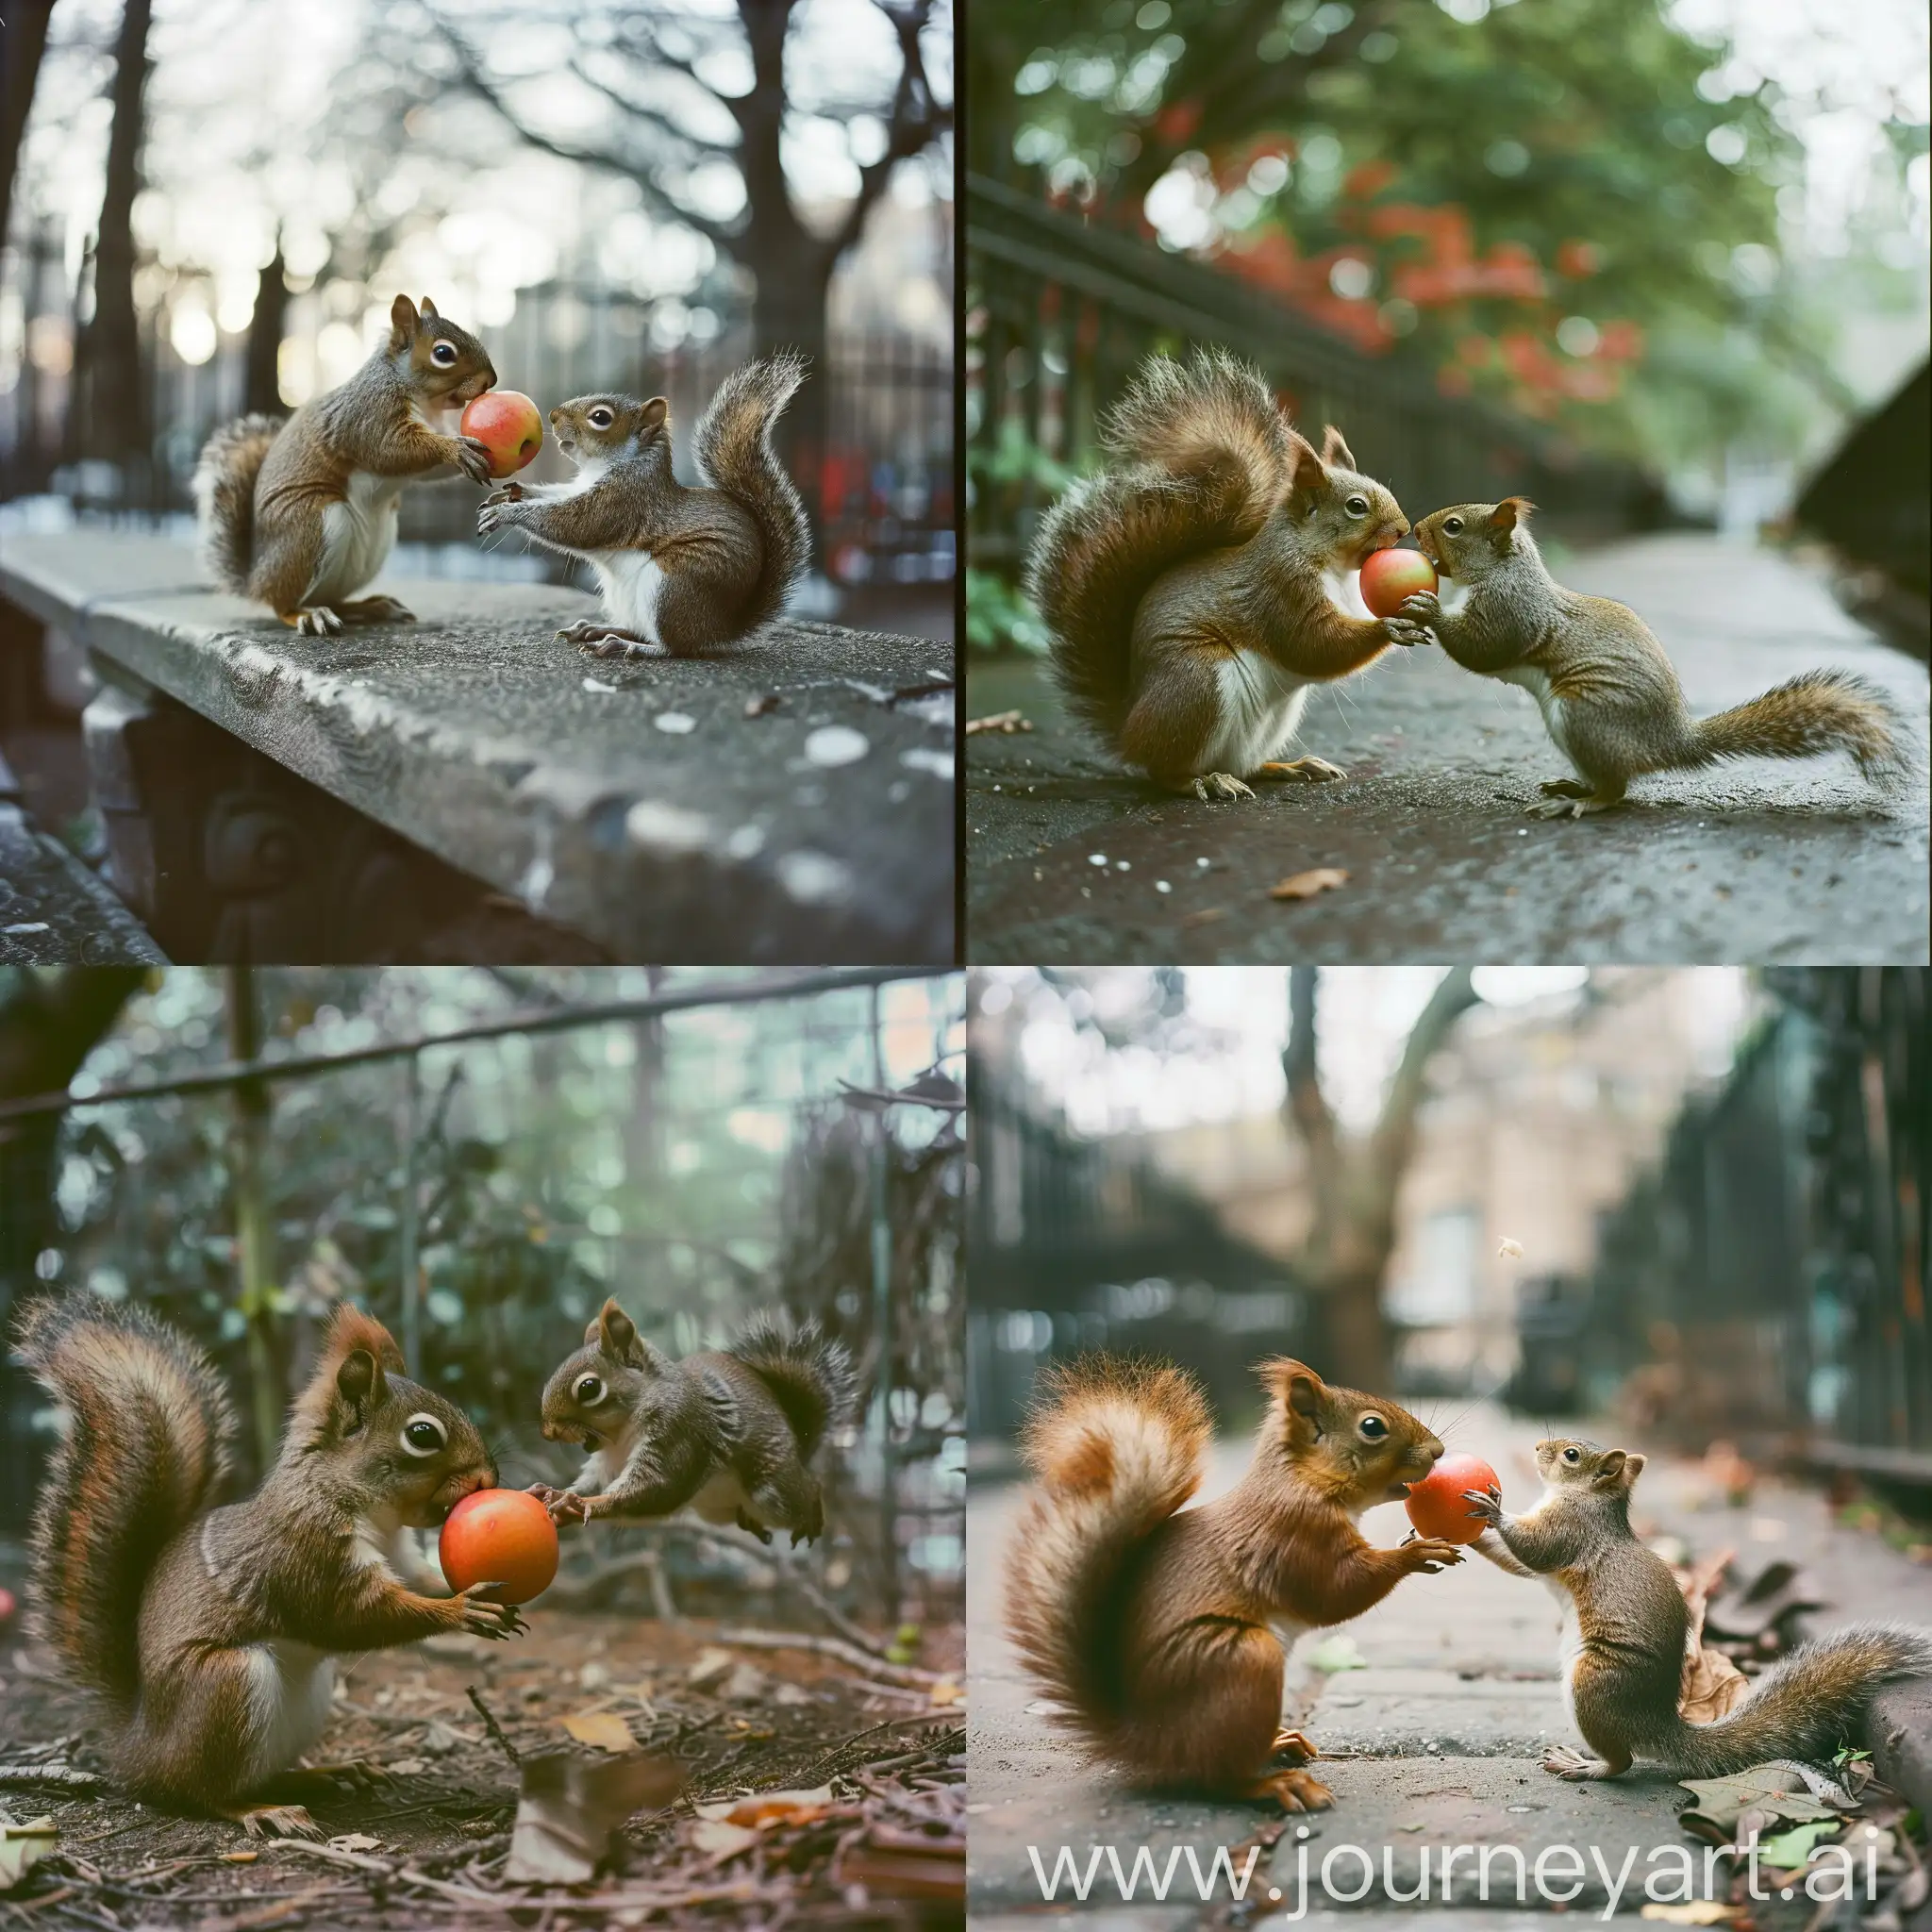 Cinematic-Moment-Squirrel-Generously-Offers-Apple-to-Bird